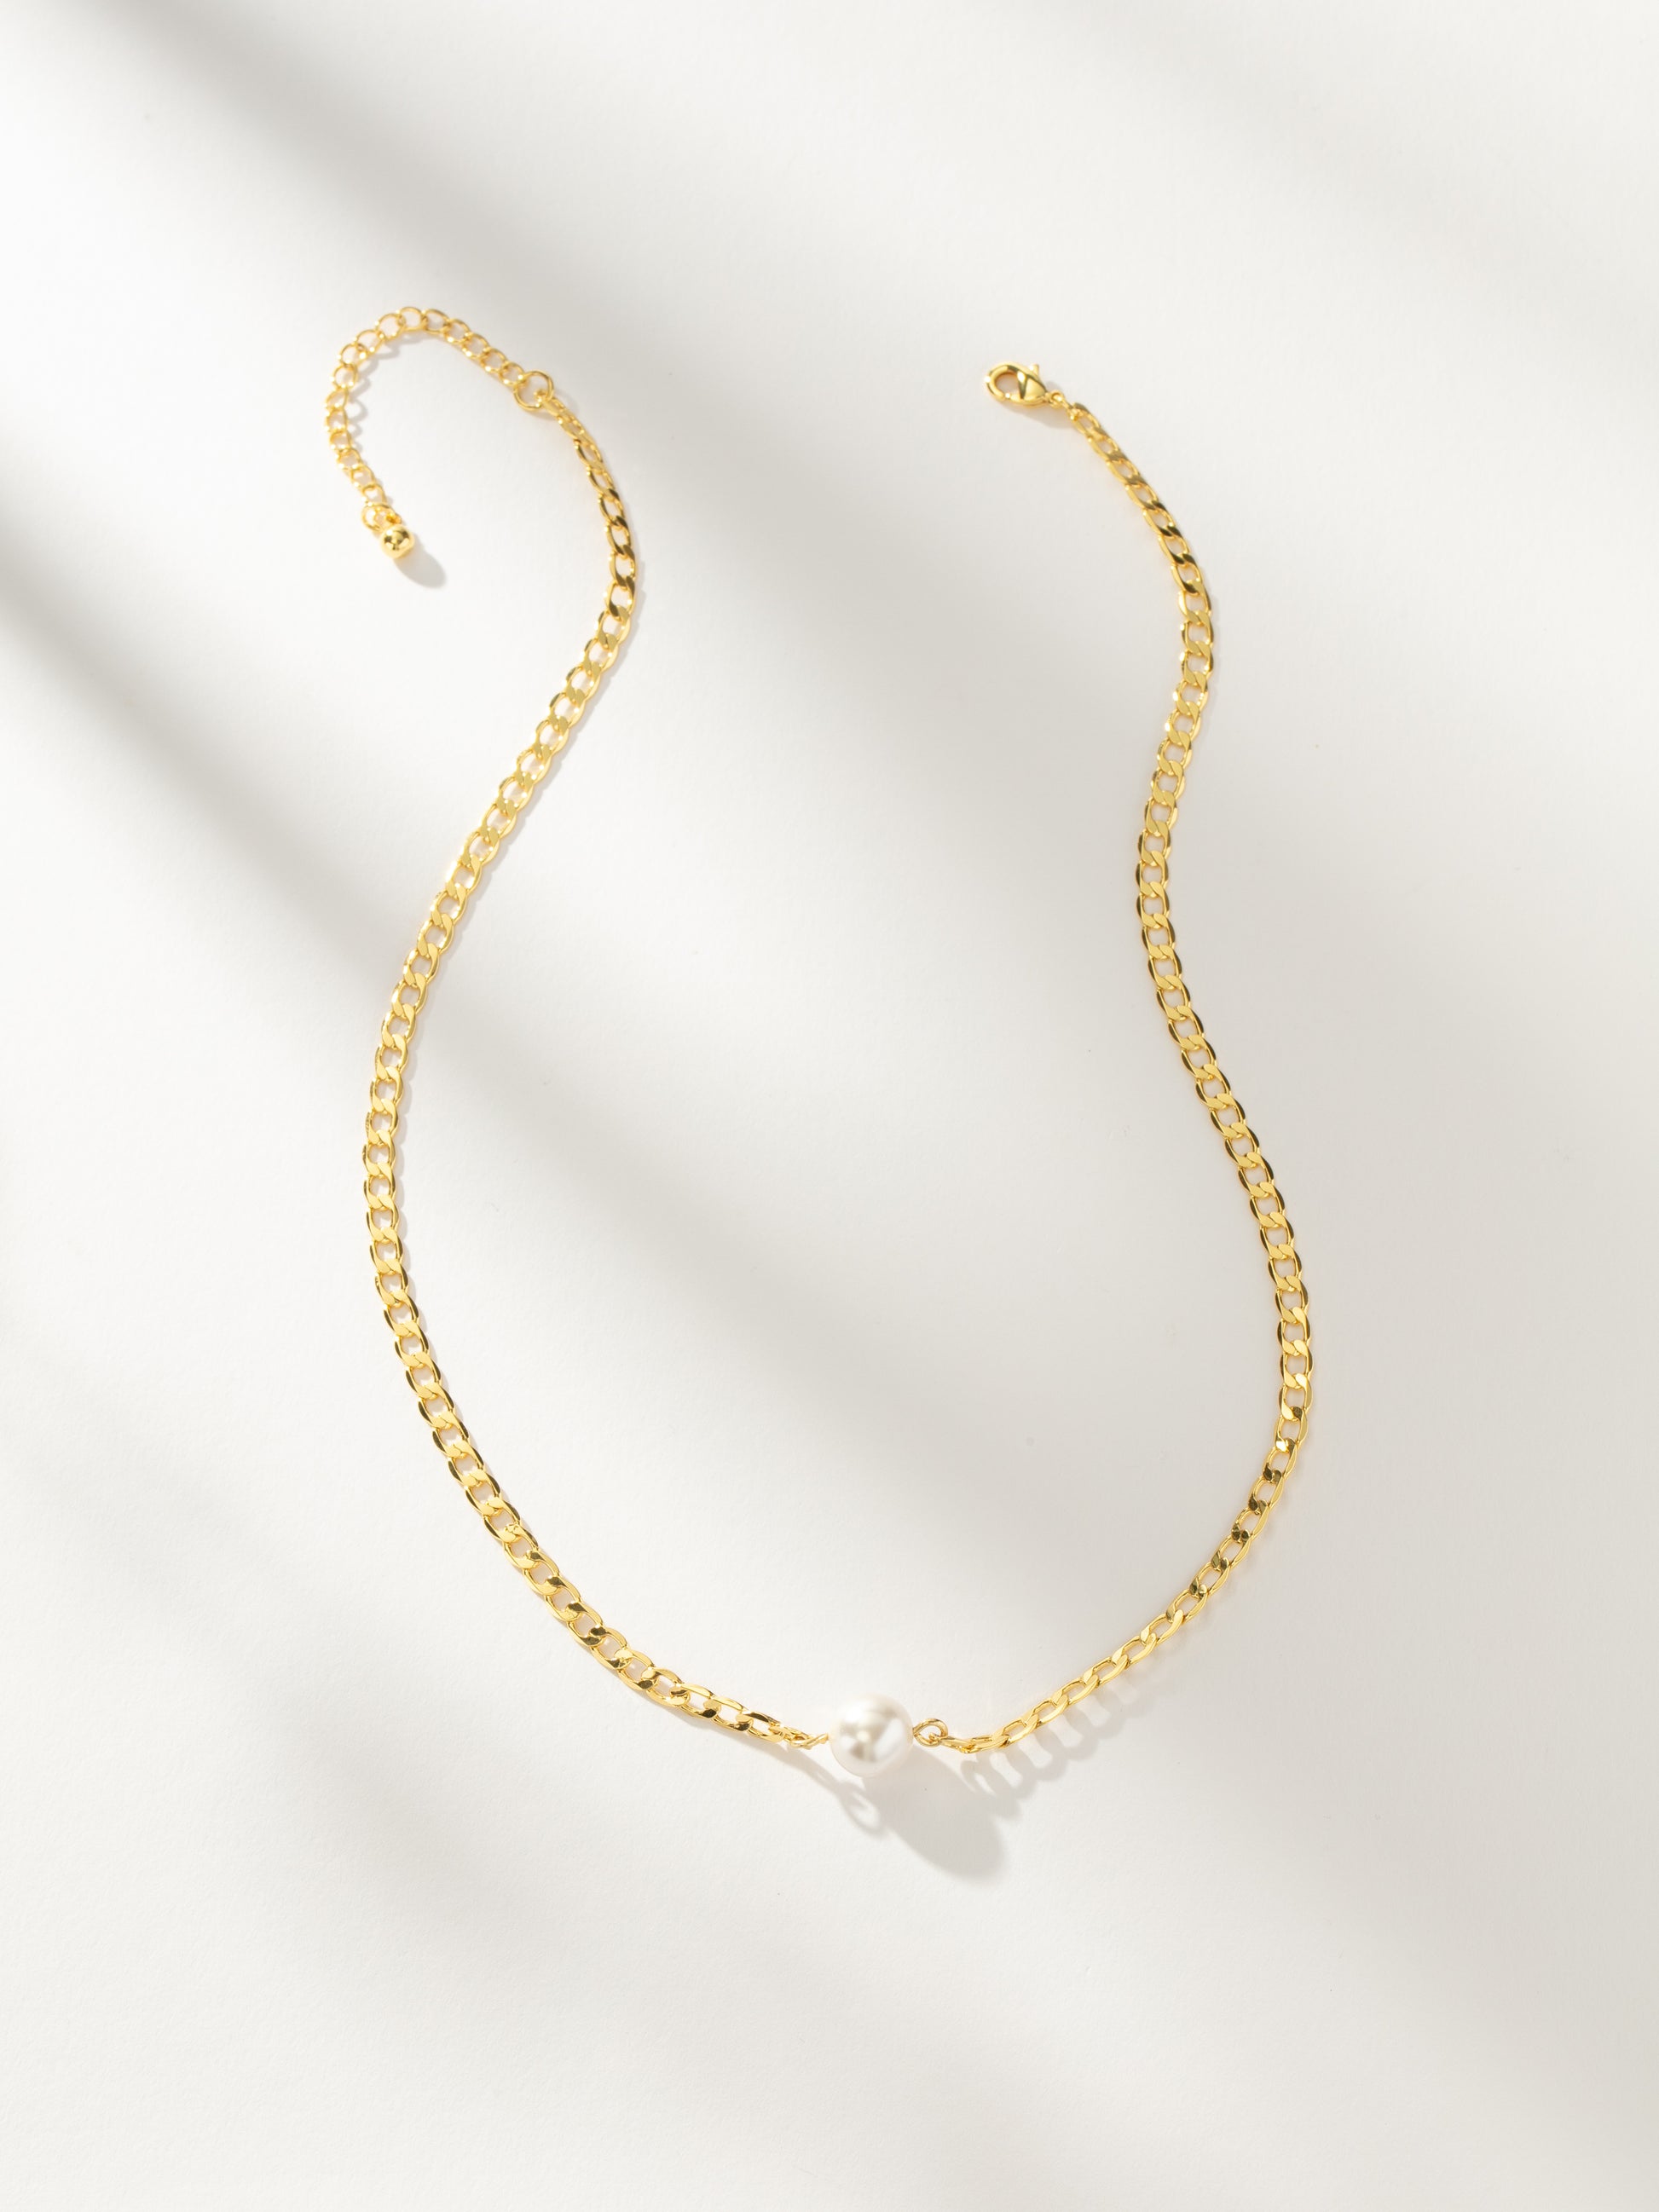 Statement Pearl Necklace | Gold | Product Image | Uncommon James